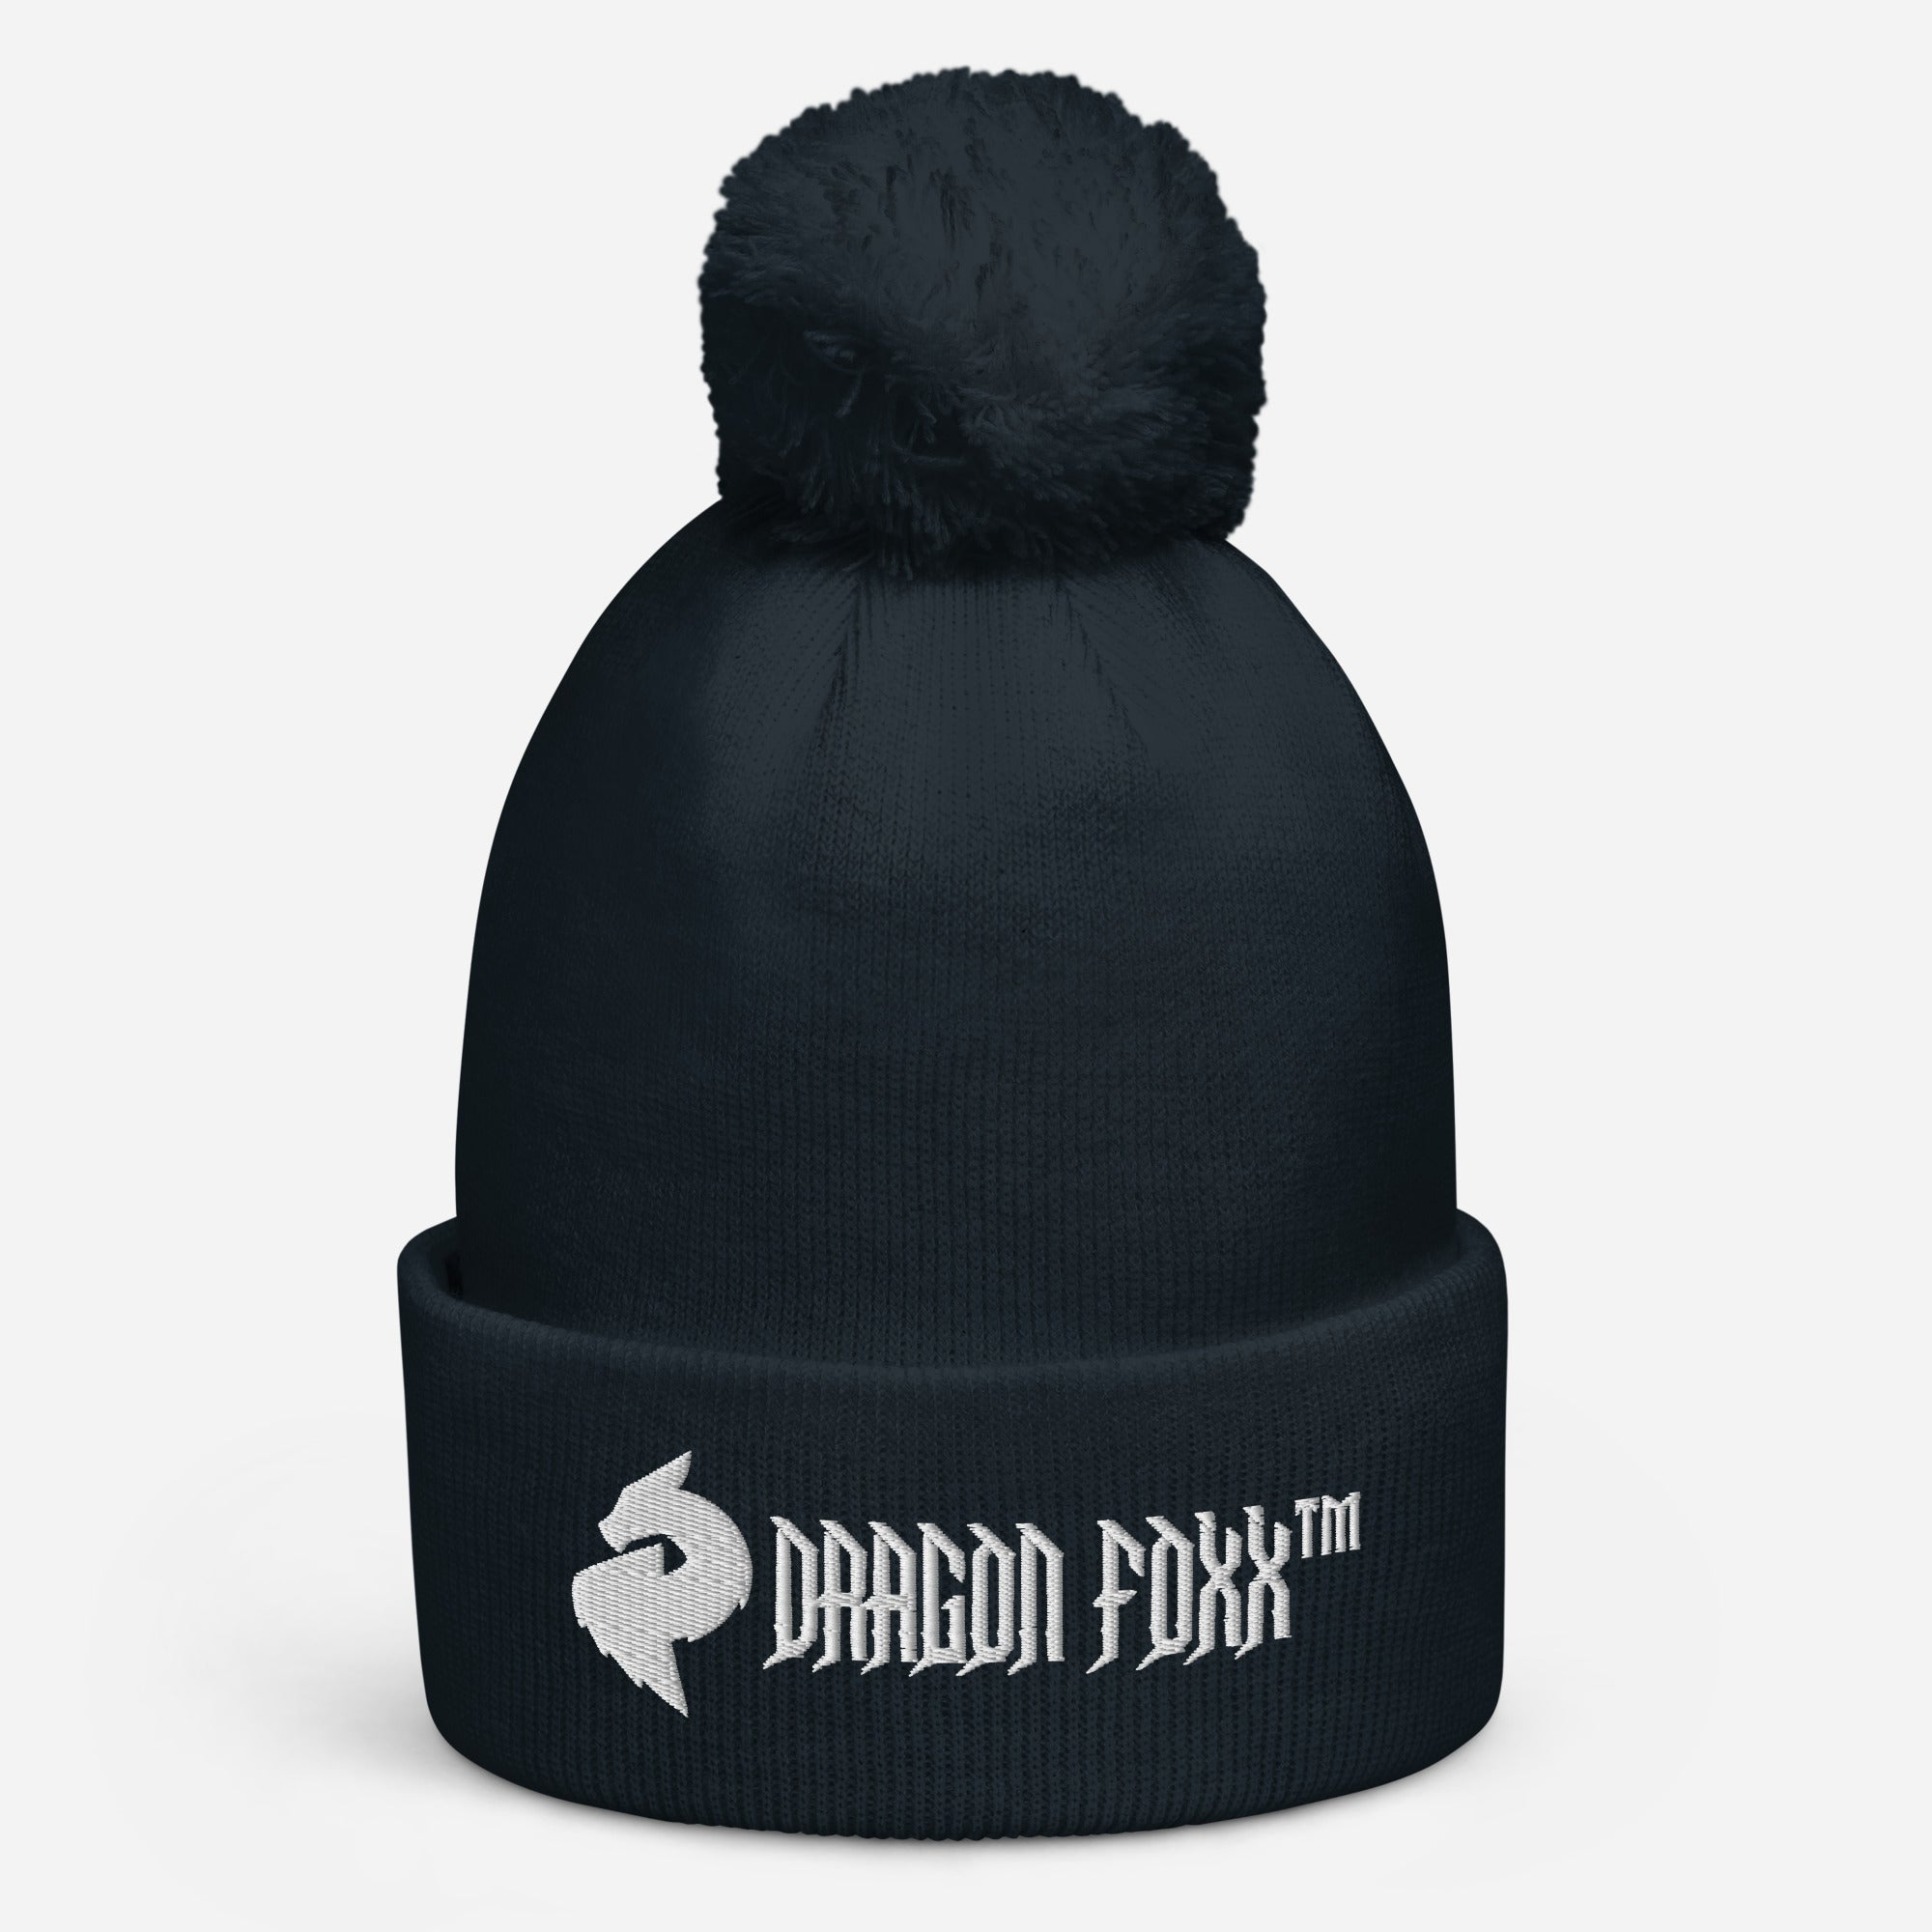 His or Hers Dragon Foxx™ Pom pom beanie in 6 Colors - His or Hers Dragon Foxx™ Pom pom beanie - DRAGON FOXX™ - His or Hers Dragon Foxx™ Pom pom beanie in 6 Colors - 8560034_11736 - French Navy - - Accessories - Beanie - Beanies